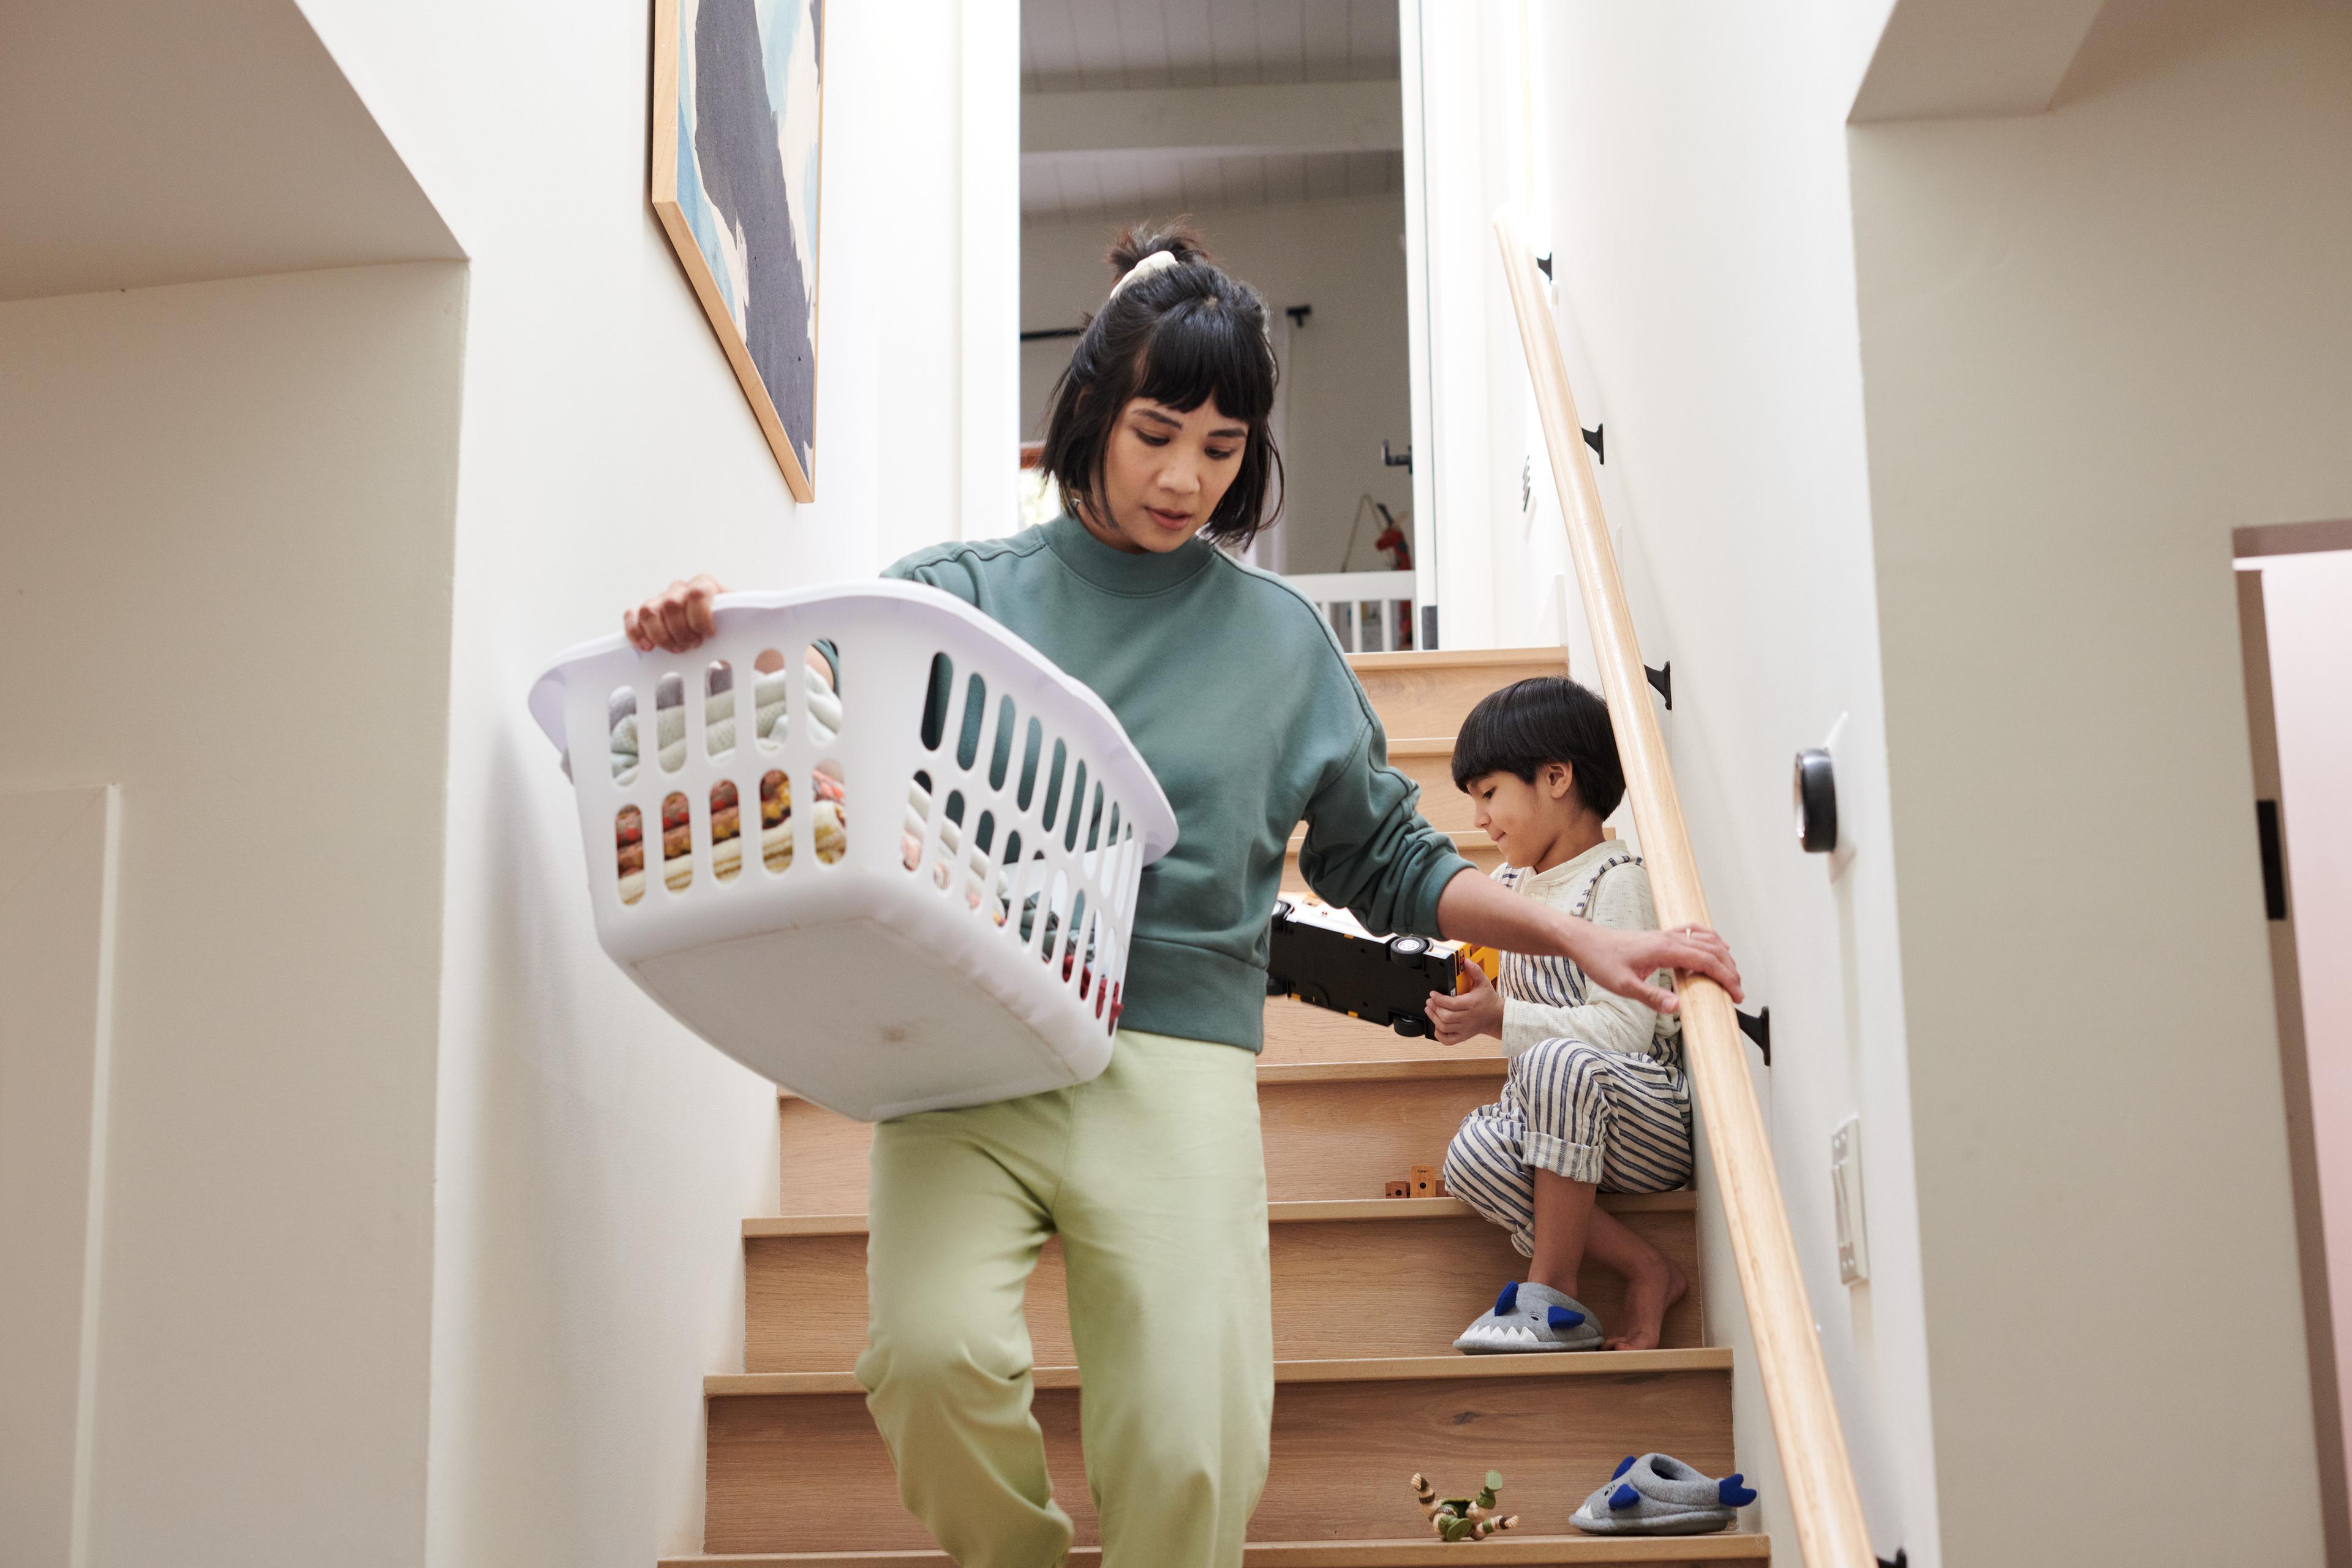 Woman walking down stairs with laundry basket past child playing with toys on the steps